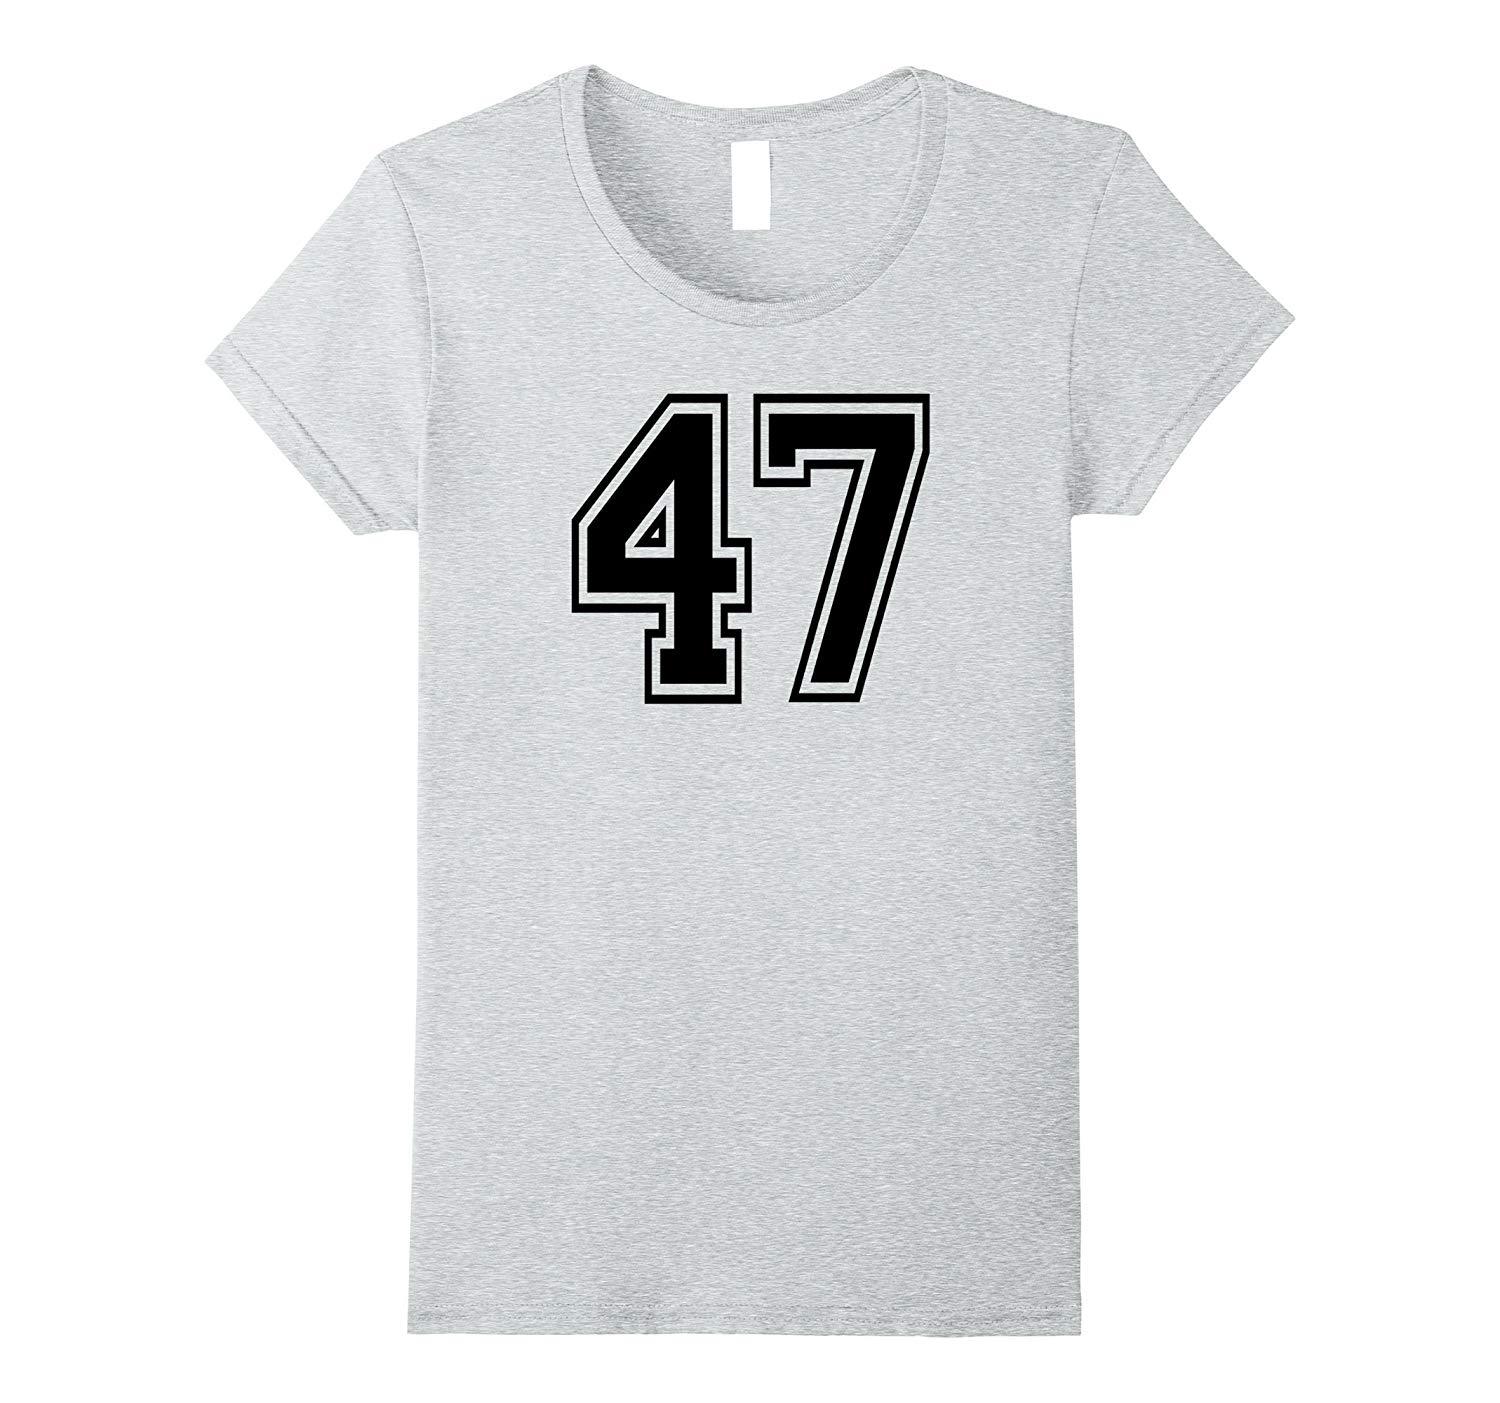 New Tee - Number #47 College Sports Team T-Tees front & back BLACK ...